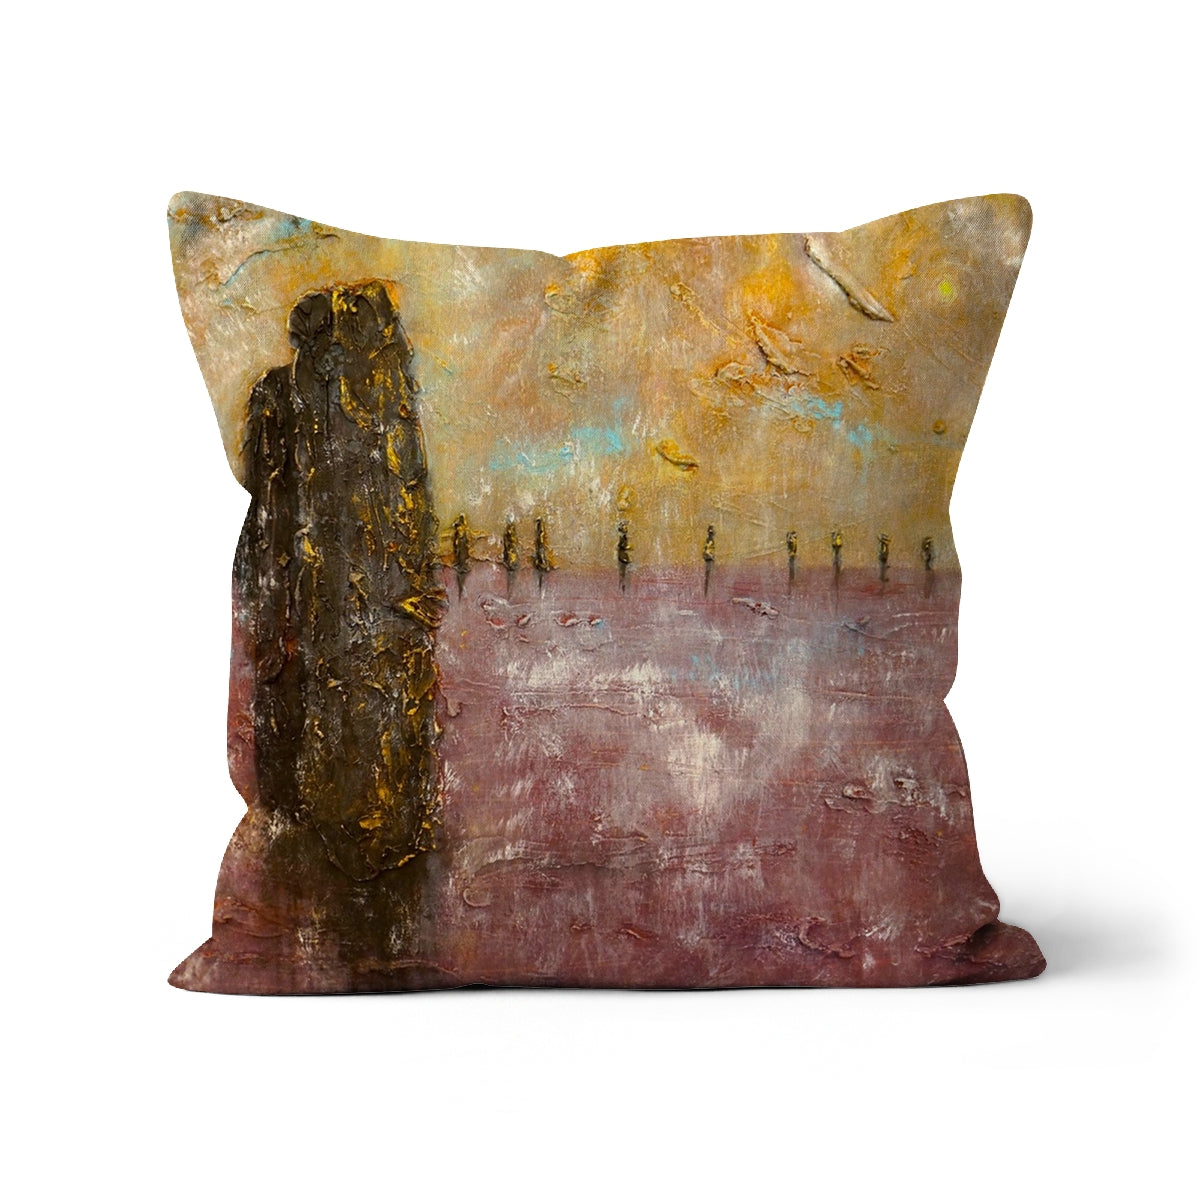 Brodgar Mist Orkney Art Gifts Cushion-Cushions-Orkney Art Gallery-Faux Suede-24"x24"-Paintings, Prints, Homeware, Art Gifts From Scotland By Scottish Artist Kevin Hunter